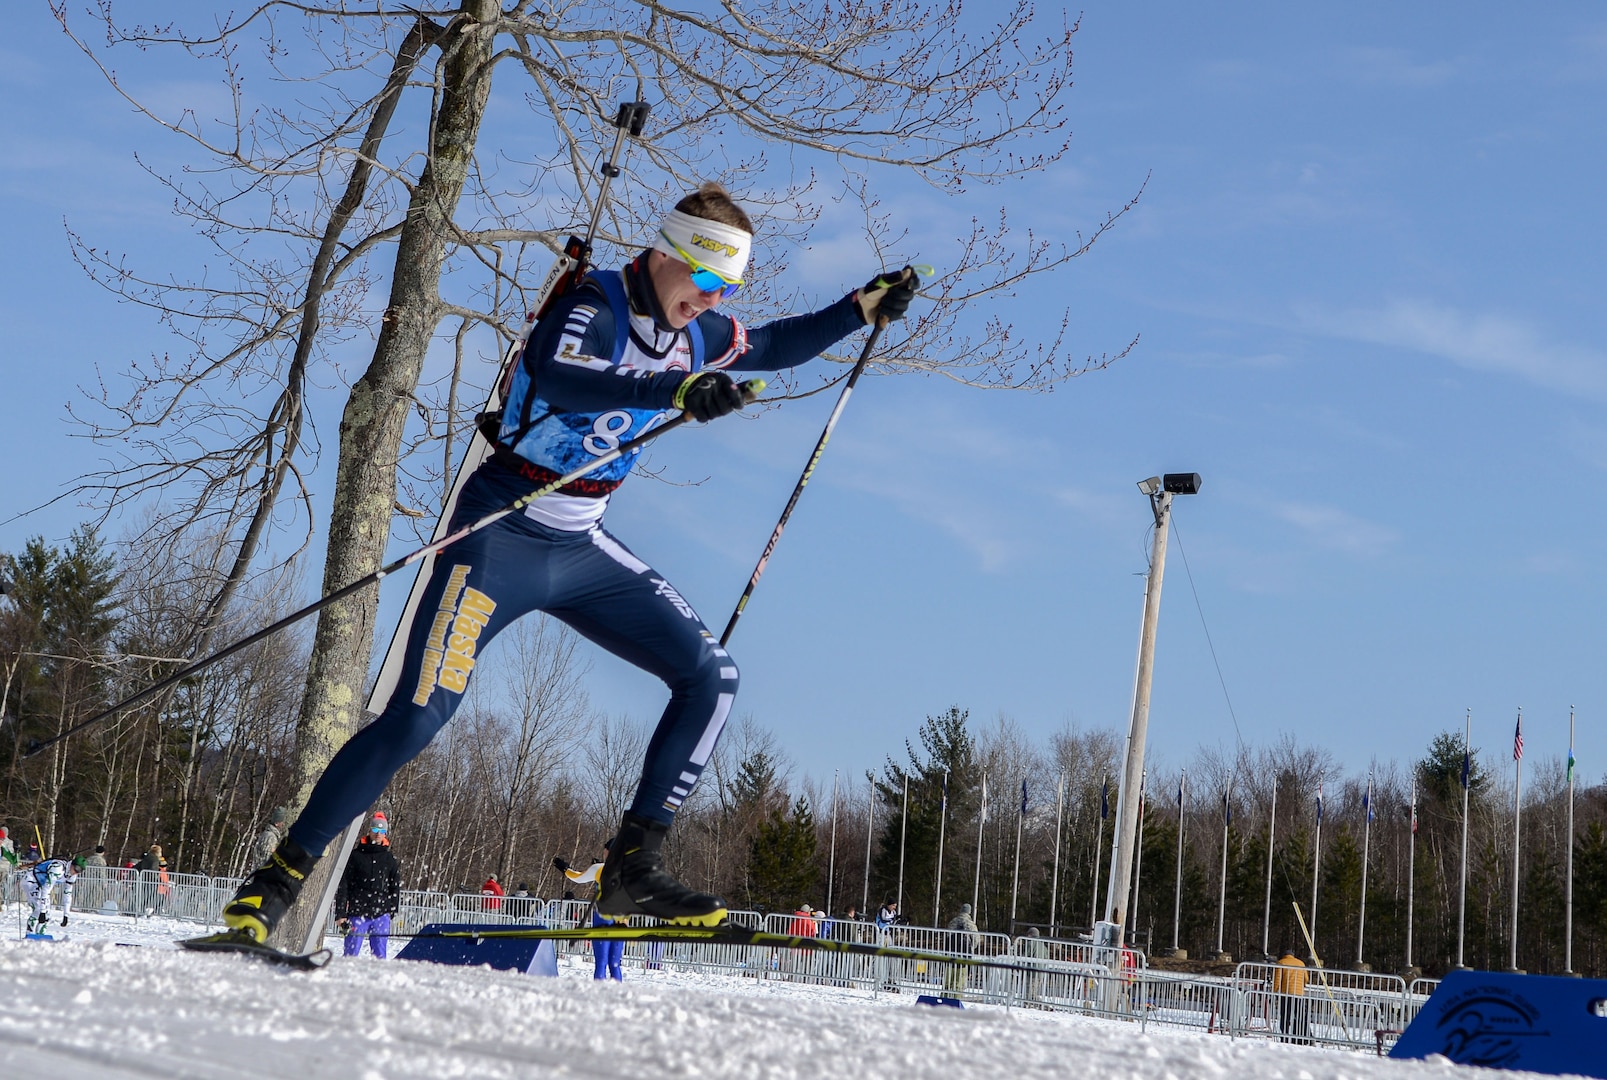 Army Pfc. Travis Cooper of the Alaska National Guard starts the 12.5-kilometer pursuit race during the 2017 U.S. Army National Guard Biathlon Championships held at Camp Ethan Allen, Vt., March 6, 2017. 